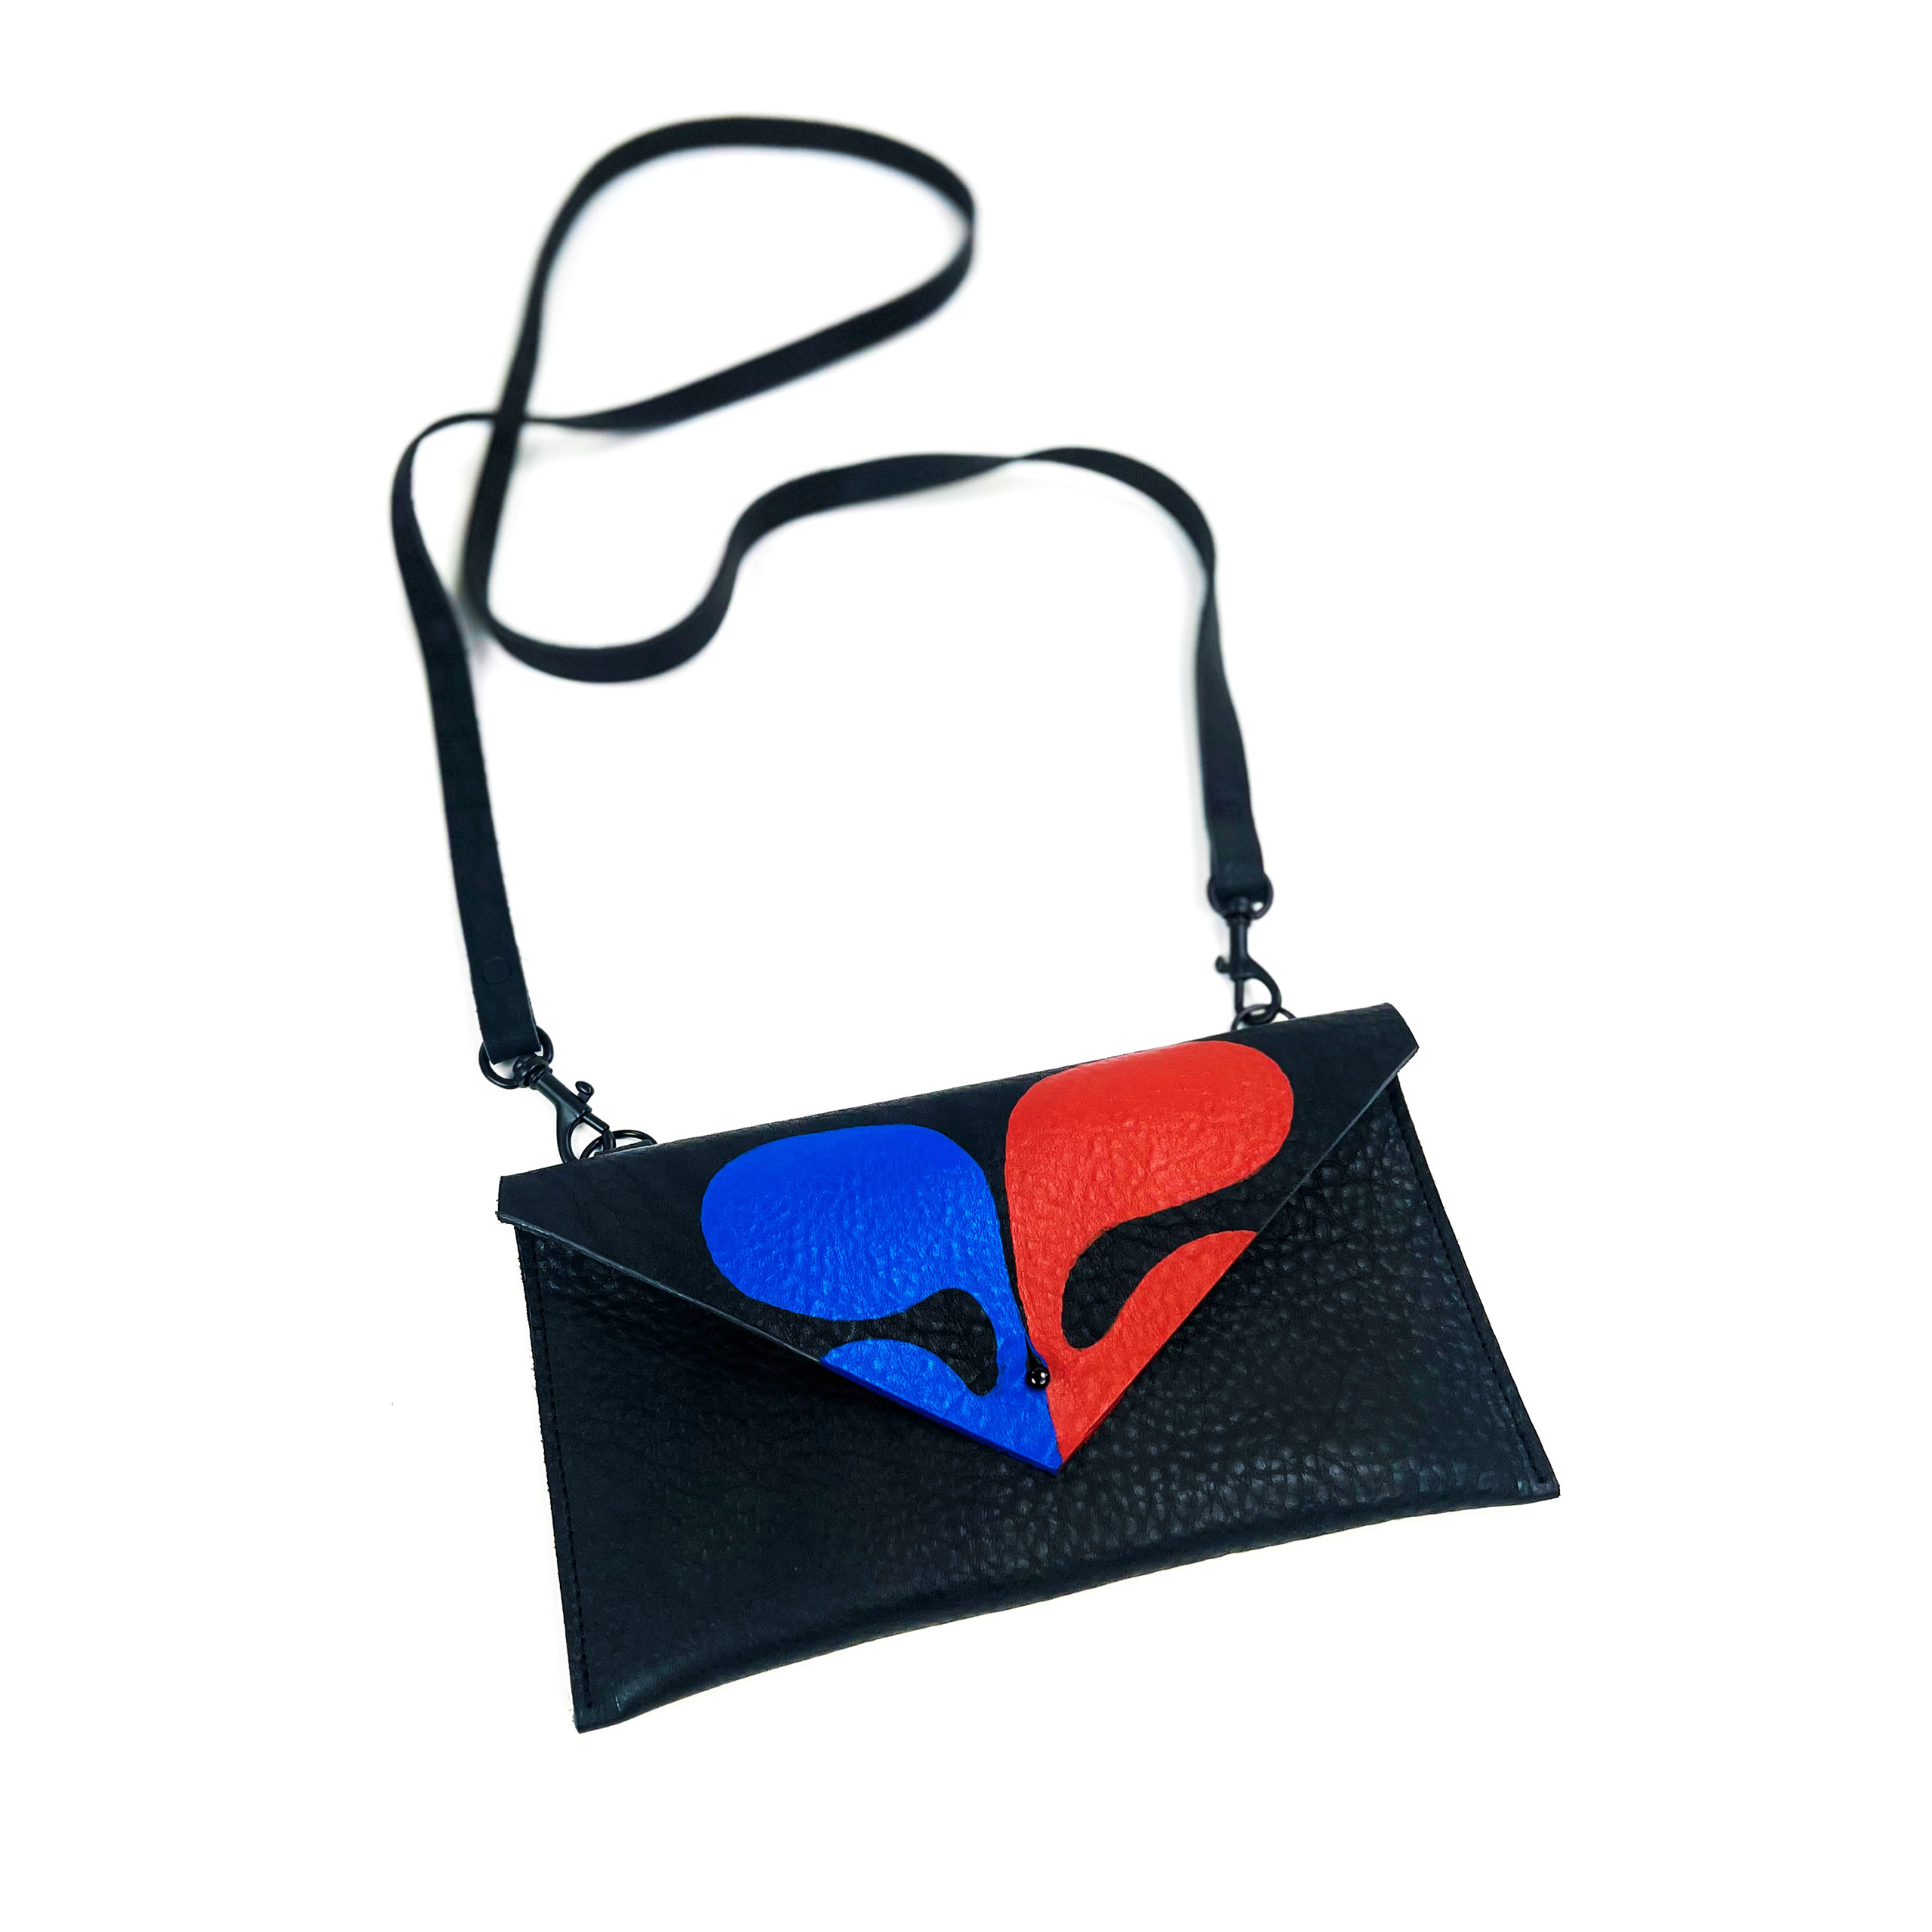 A black leather shoulder bag with a sparkling red and blue heart design, isolated on a white background.